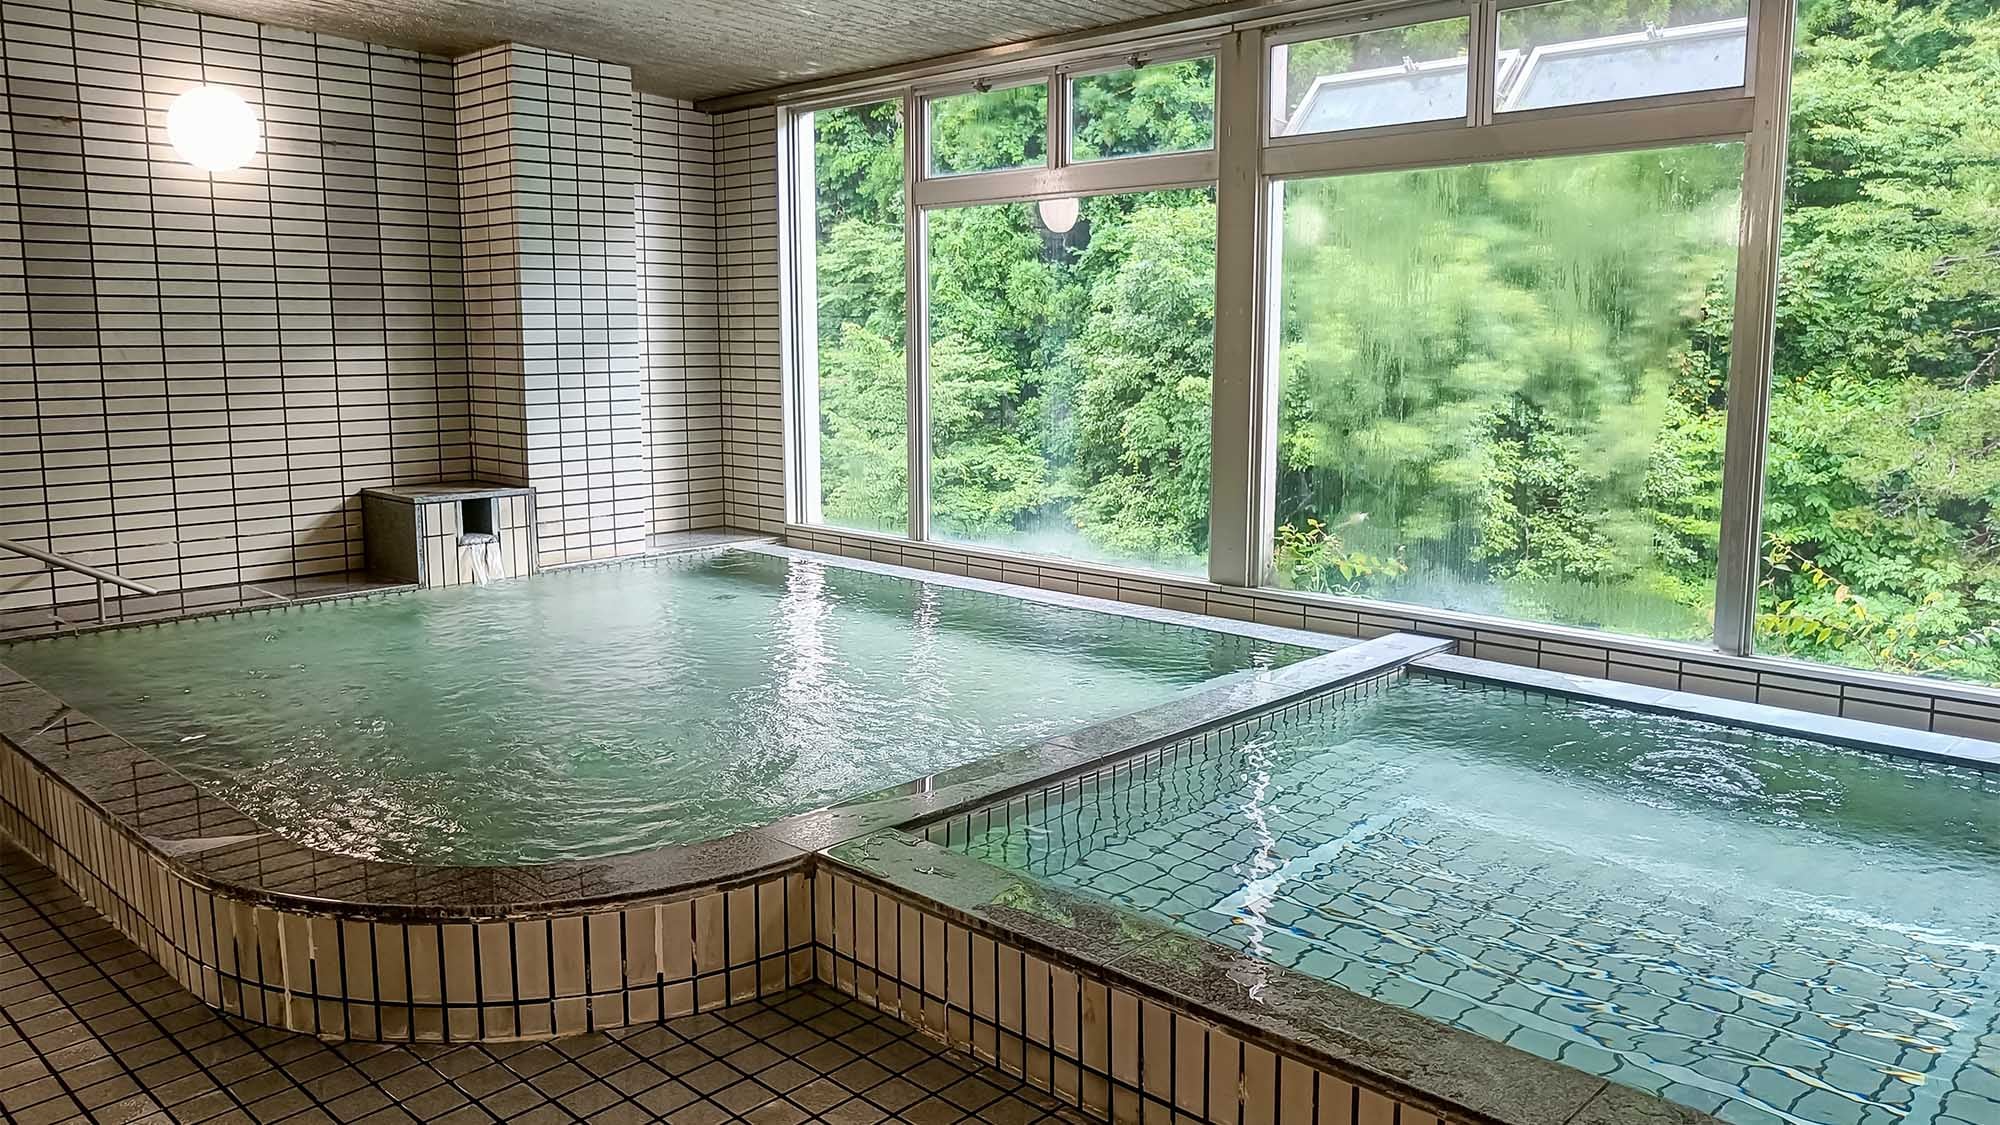 ・ [Onsen] Refresh your body tired from sightseeing and hiking on Mt. Koya at a natural hot spring ♪